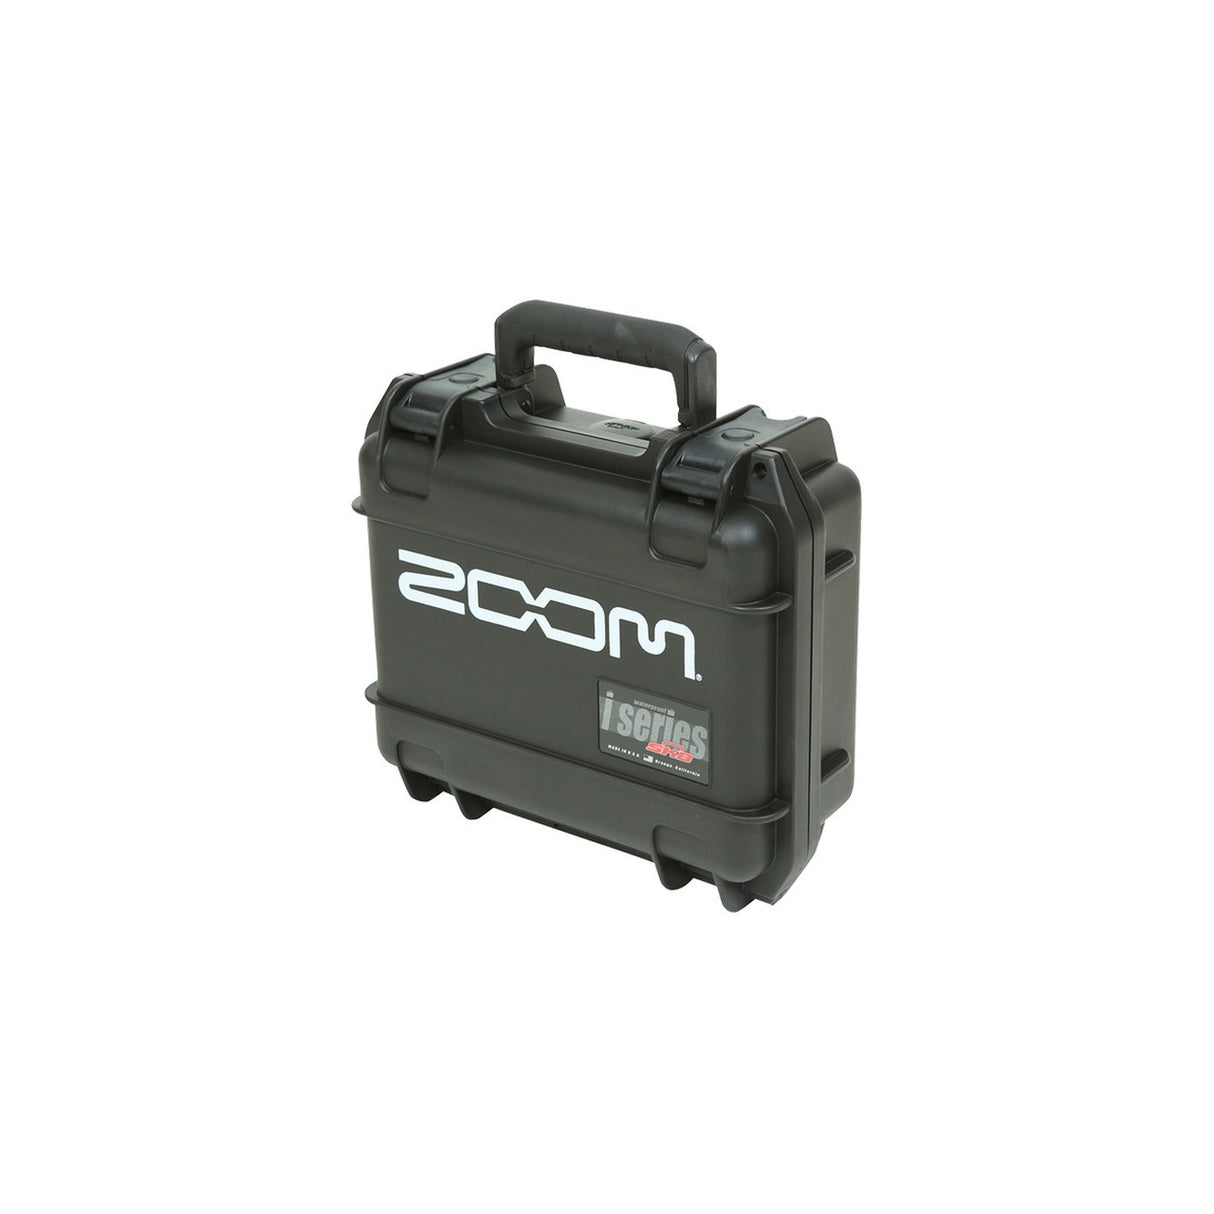 SKB 3I-0907-4-H6 | iSeries Waterproof Hard Case For The Zoom H6 Recorders